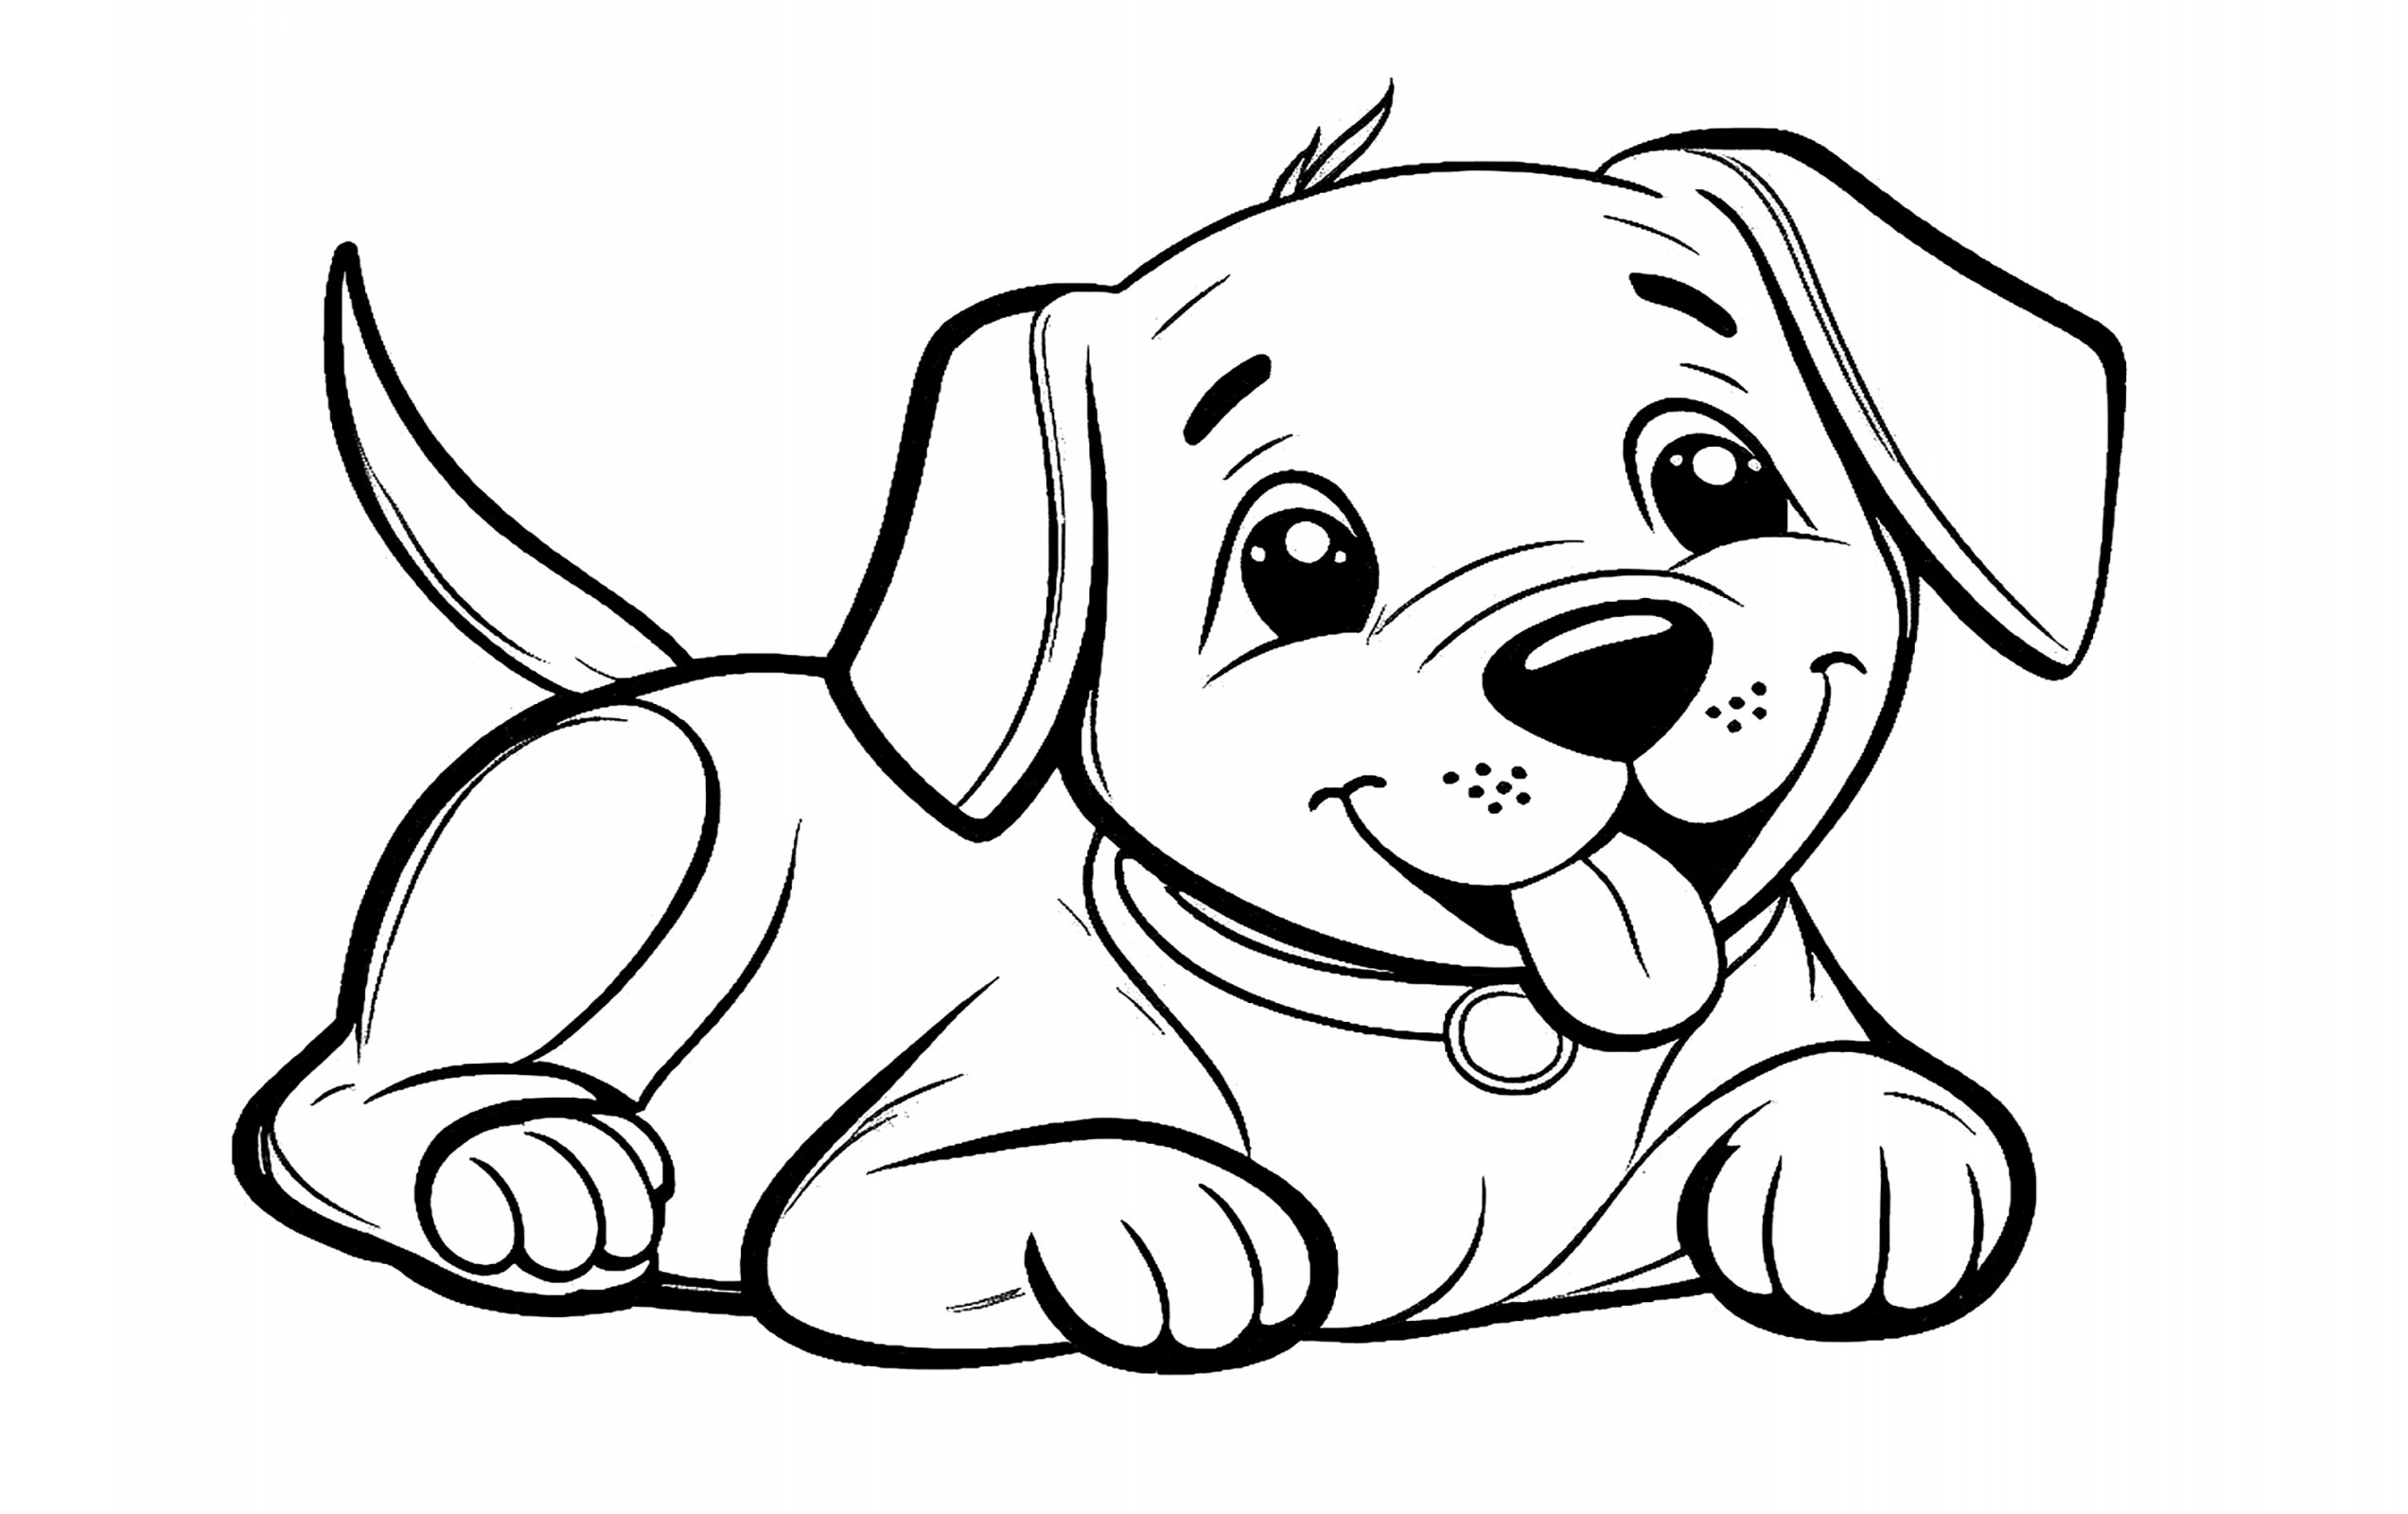 Easy to color dog - Dogs Kids Coloring Pages